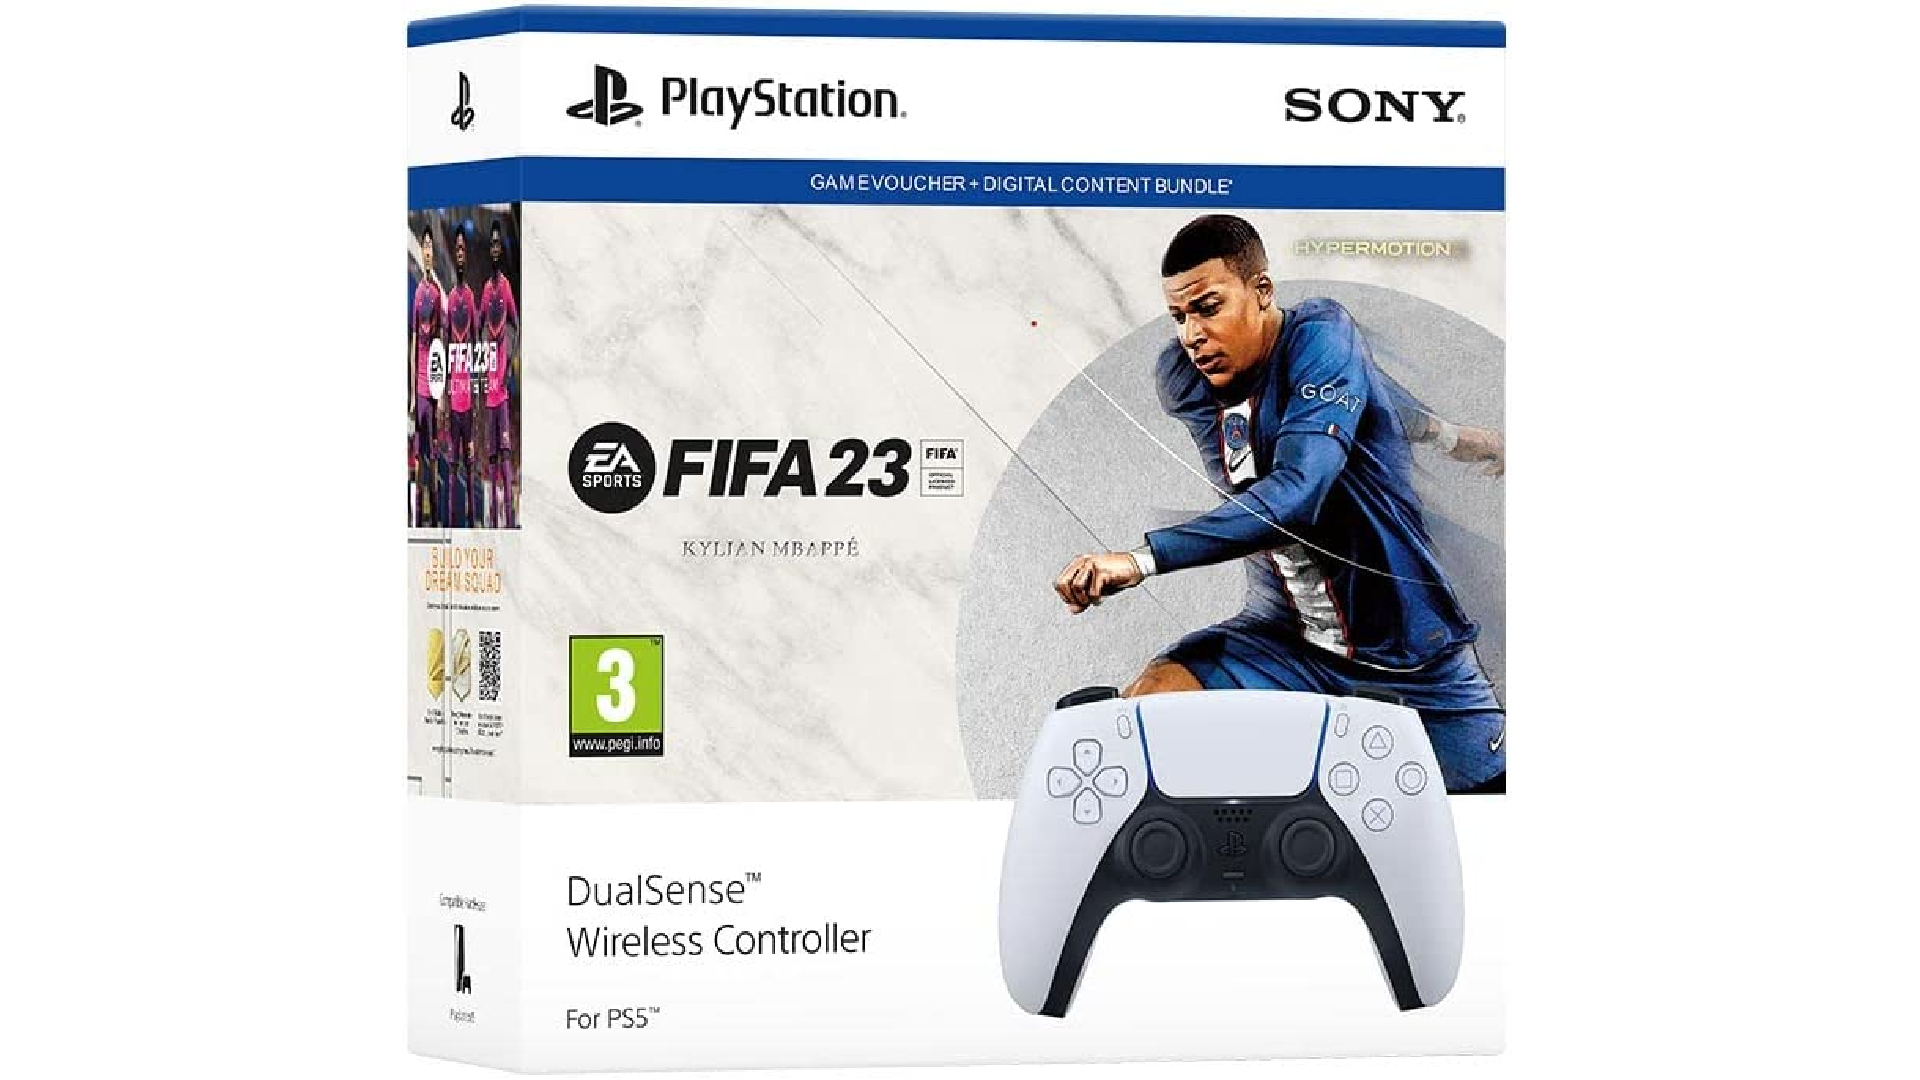 £30 on this FIFA 23 and DualSense Controller bundle this Cyber Monday